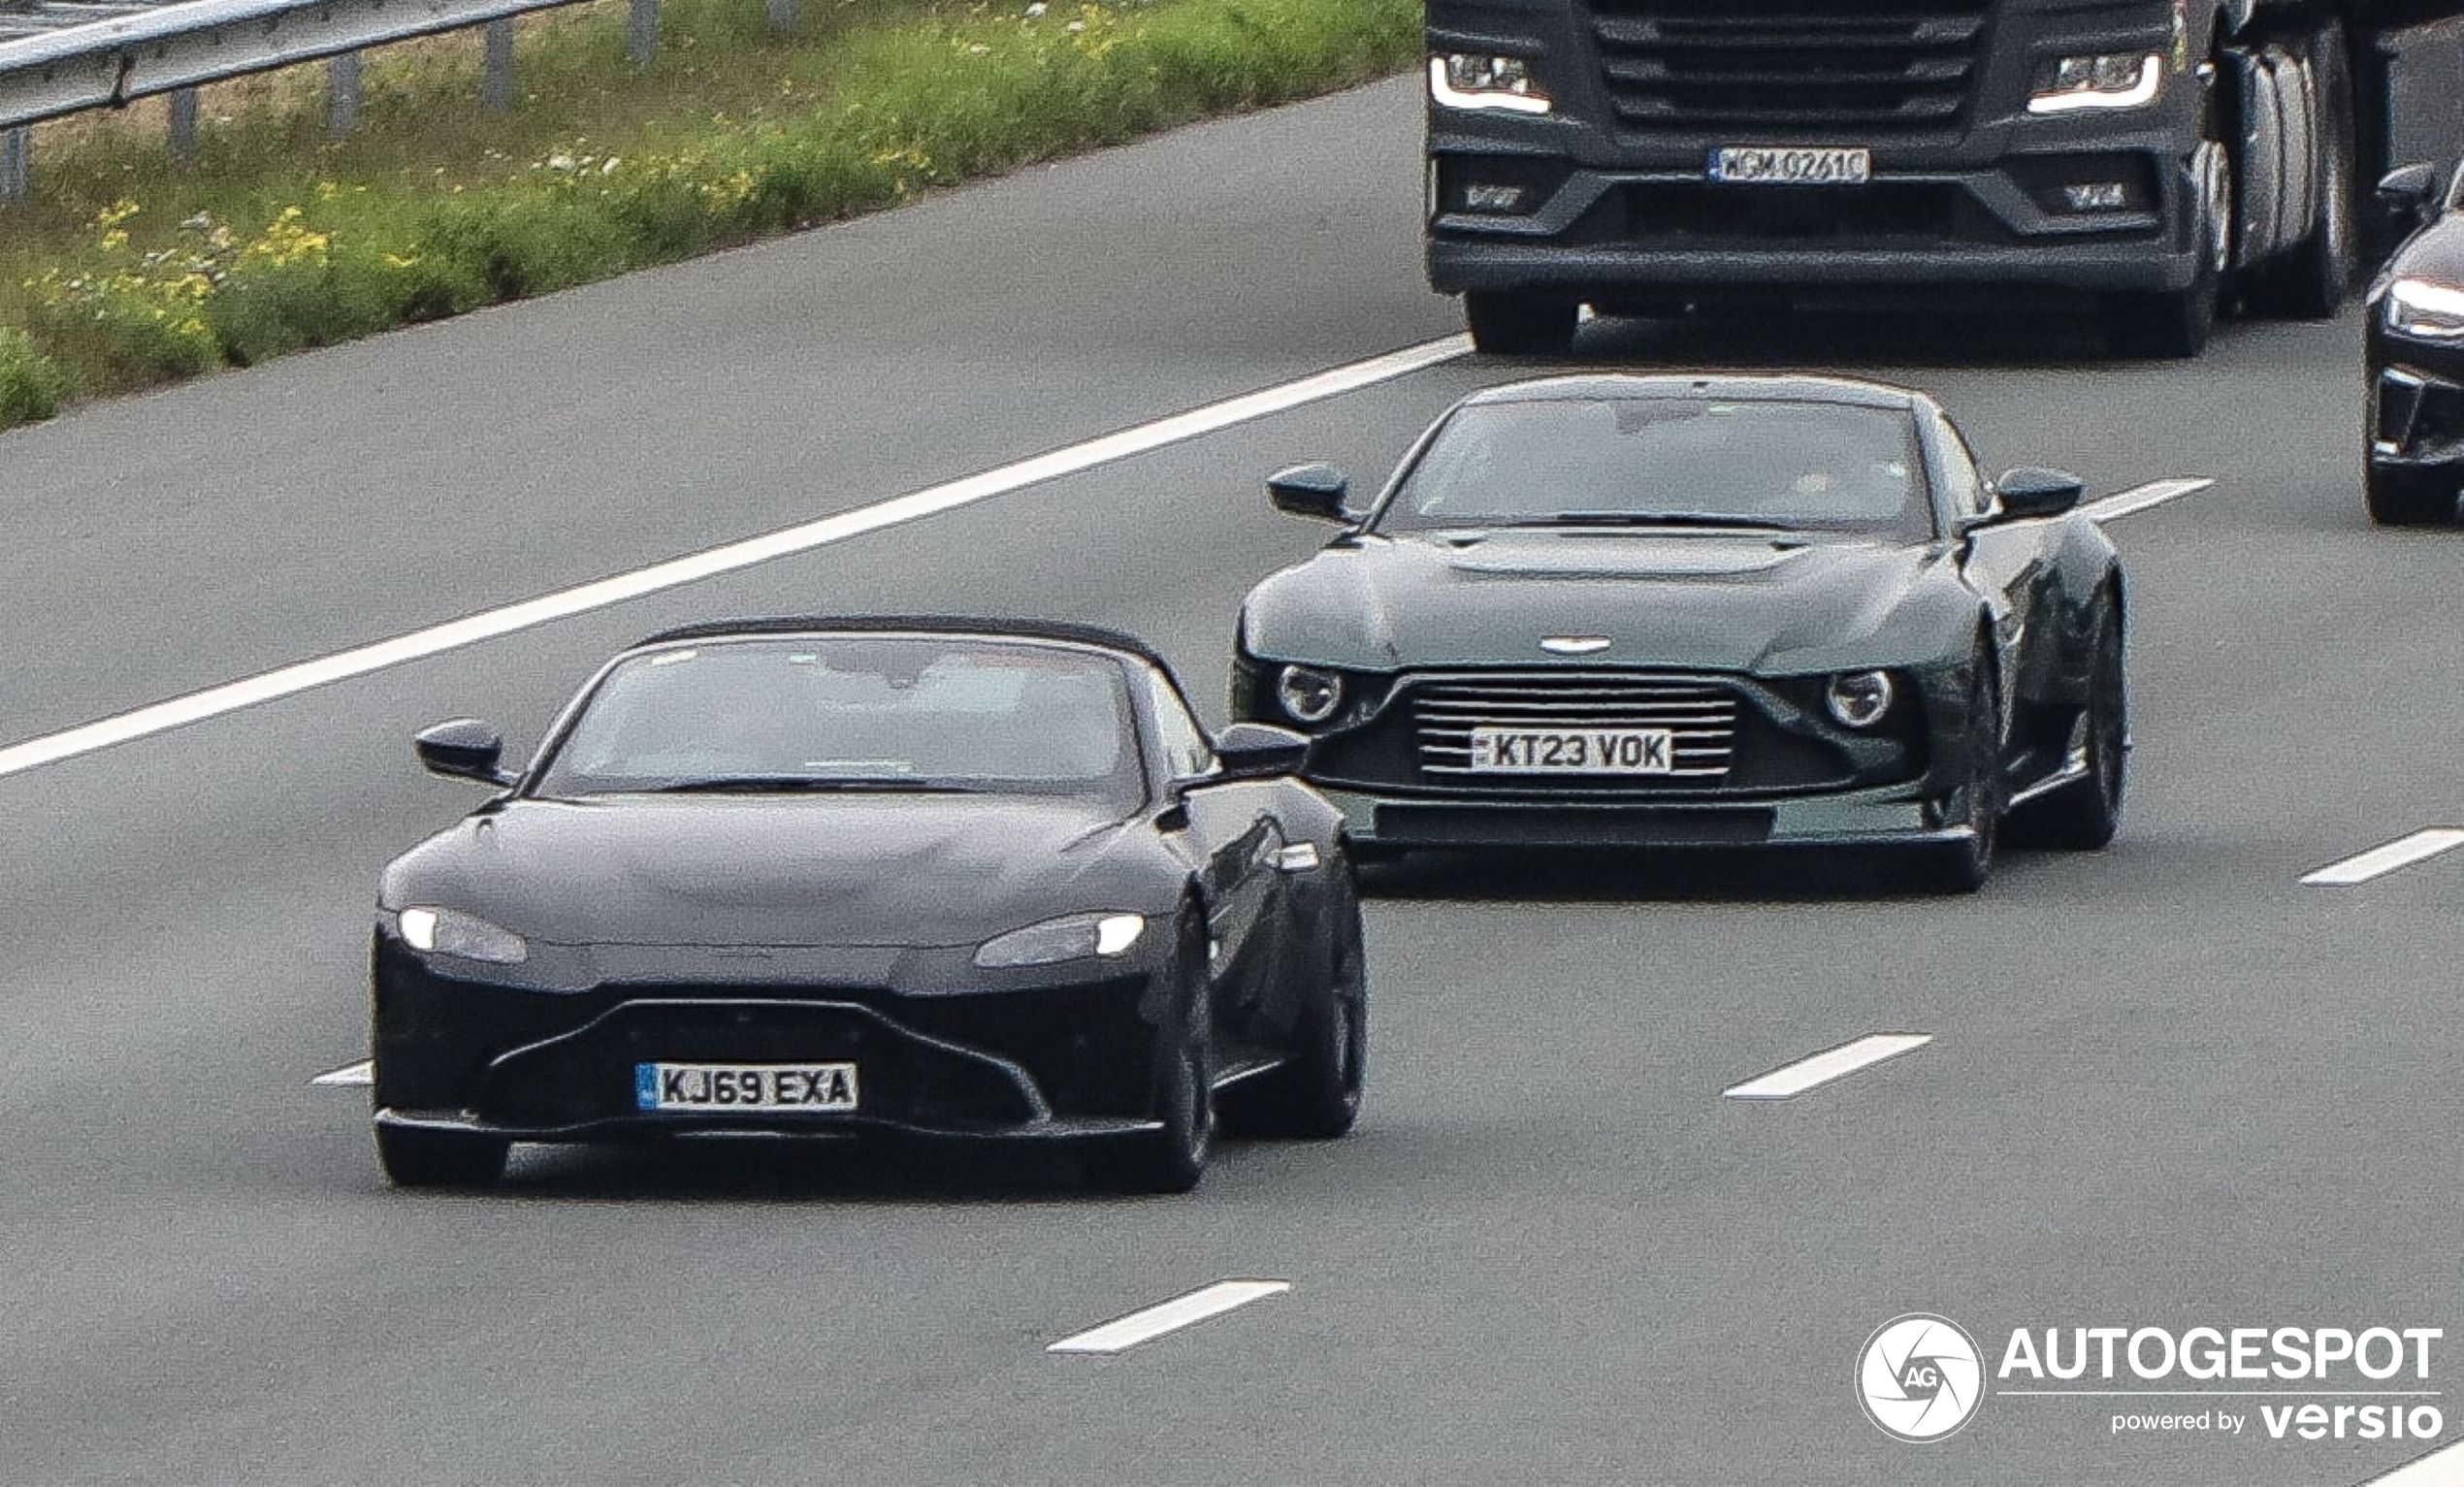 The very first Aston Martin Valour has been spotted in the Netherlands